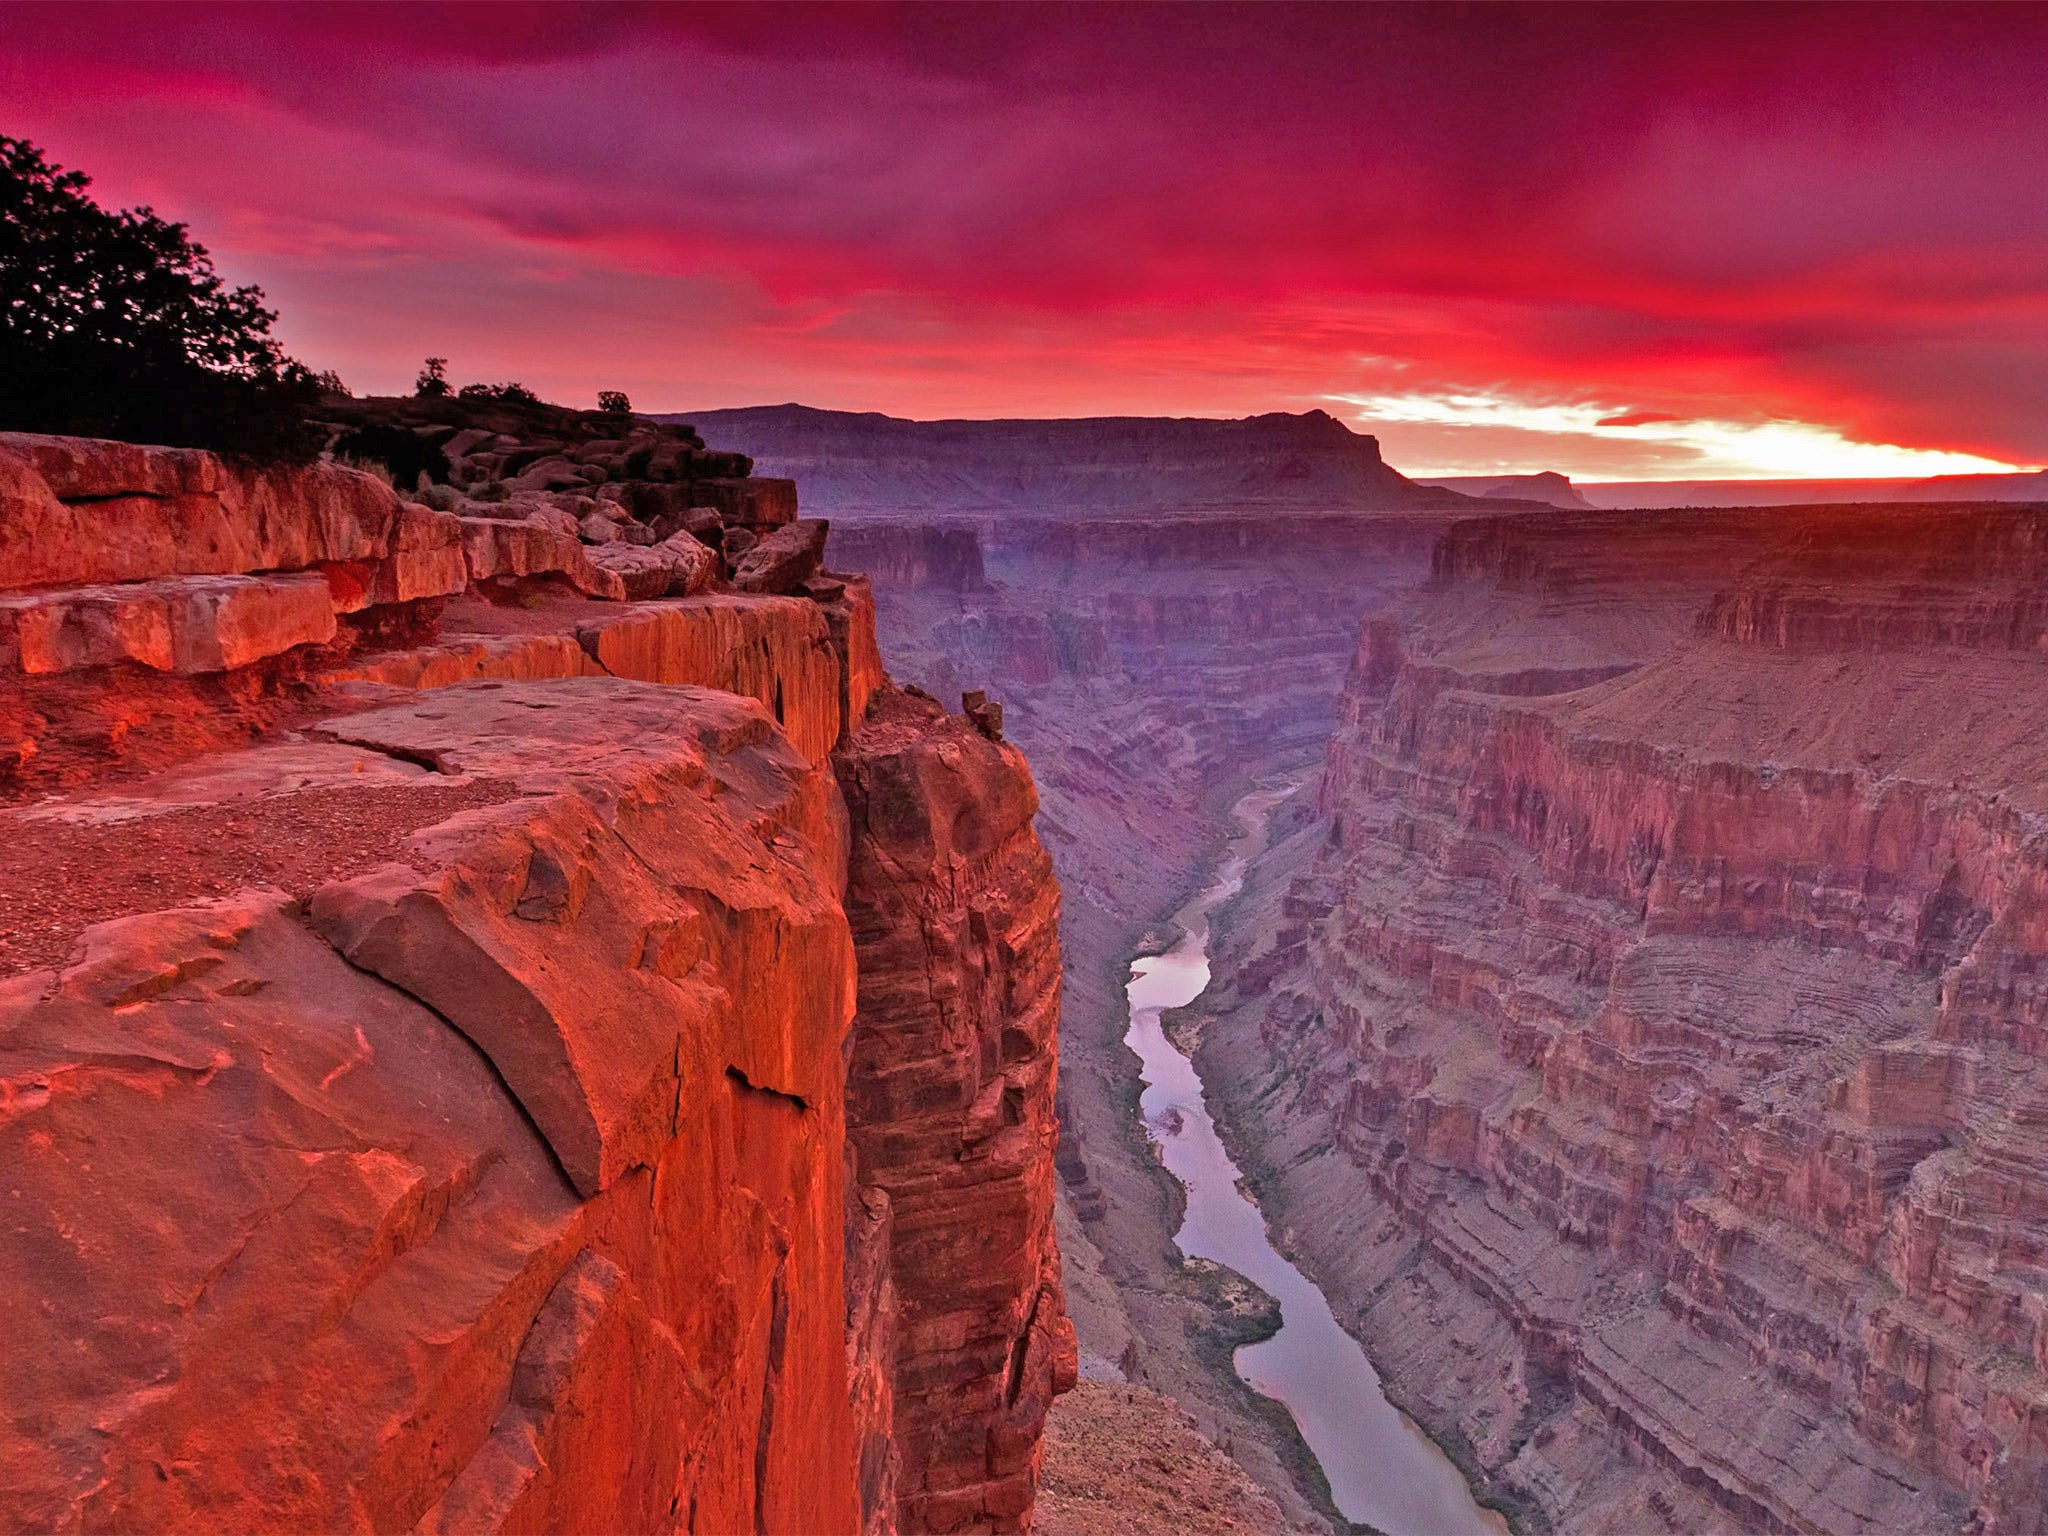 National parks, such as the Grand Canyon in Colorado, and refuse services, have been shut down